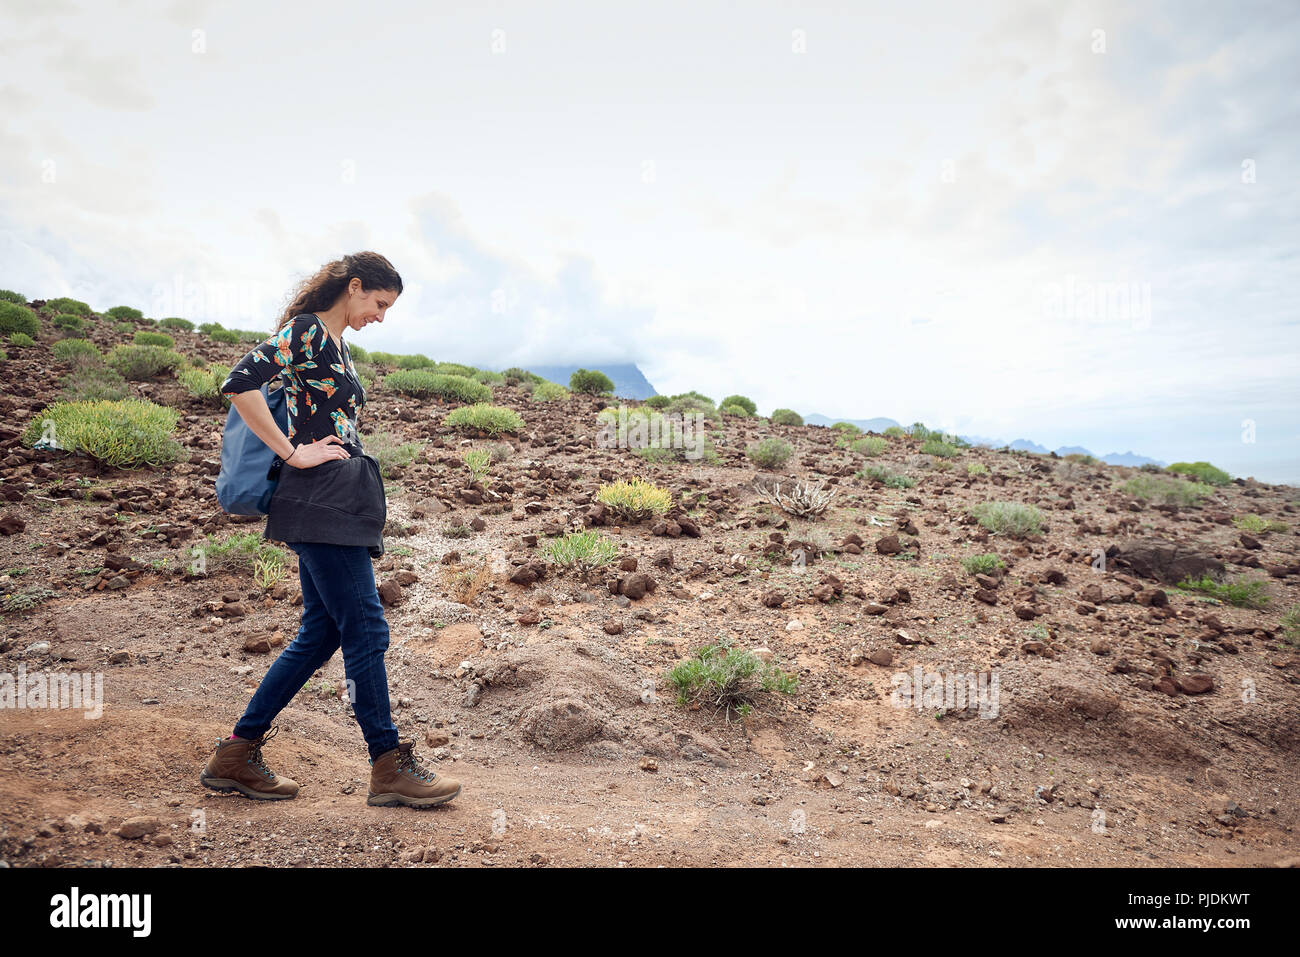 Woman hiking on dirt track in arid landscape, Las Palmas, Gran Canaria, Canary Islands, Spain Stock Photo